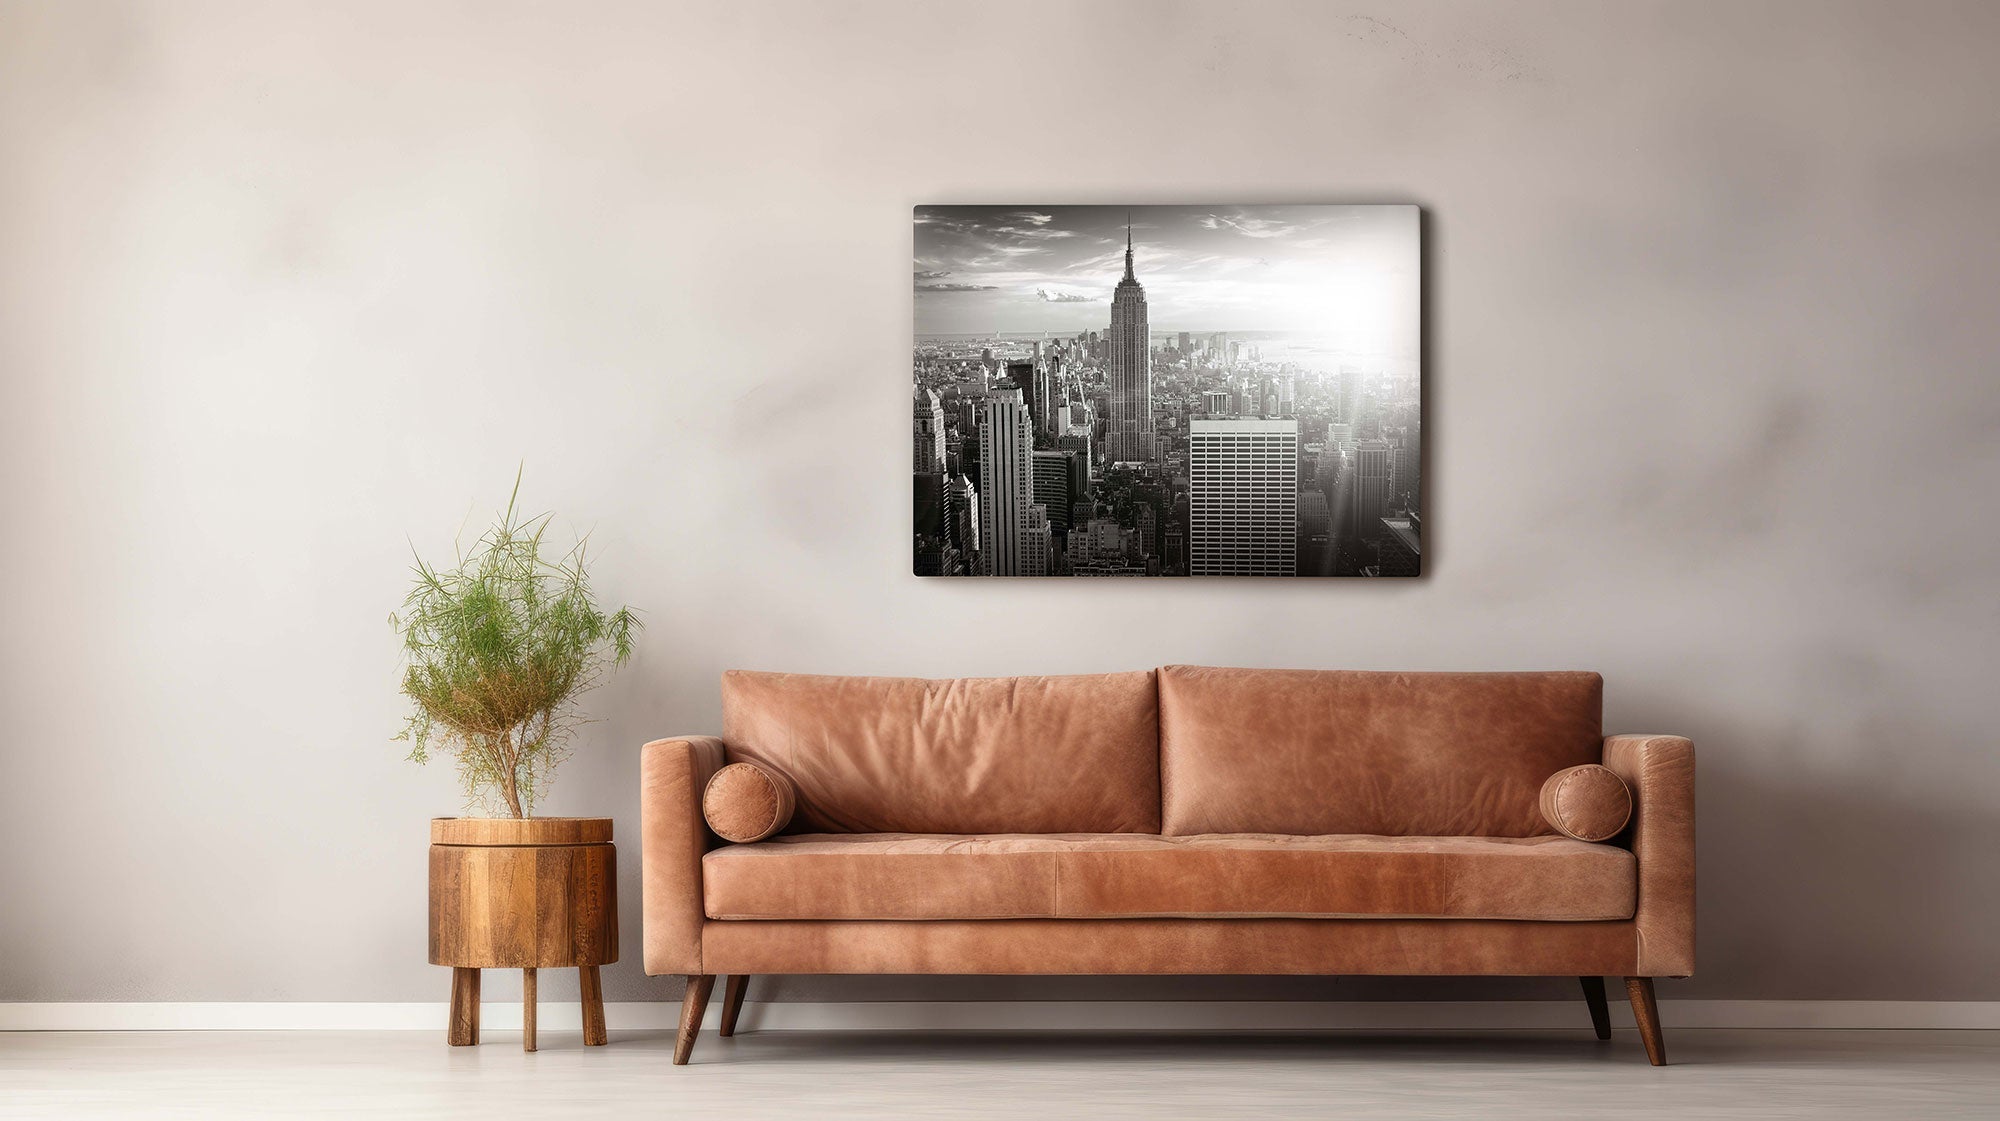 modern room with leather camel brown couch and a black and white image of new york city on the wall as wall art